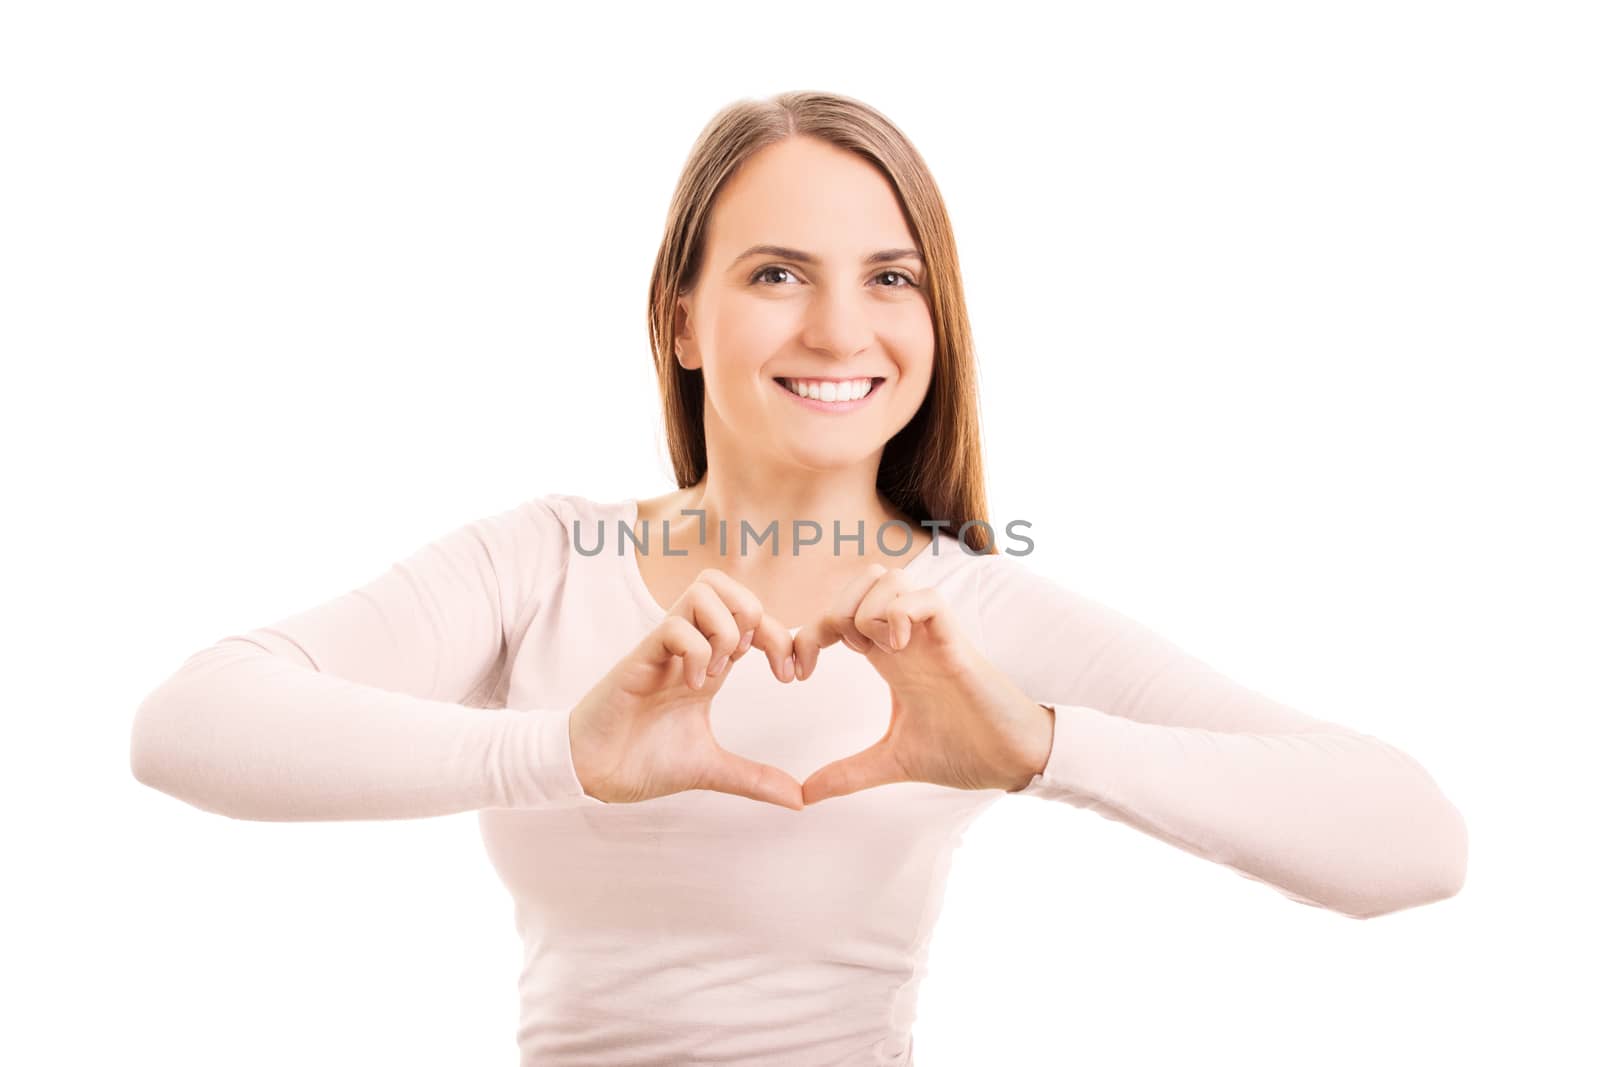 Beauty portrait of a smiling young girl making a heart shaped hand gesture, isolated on white background.